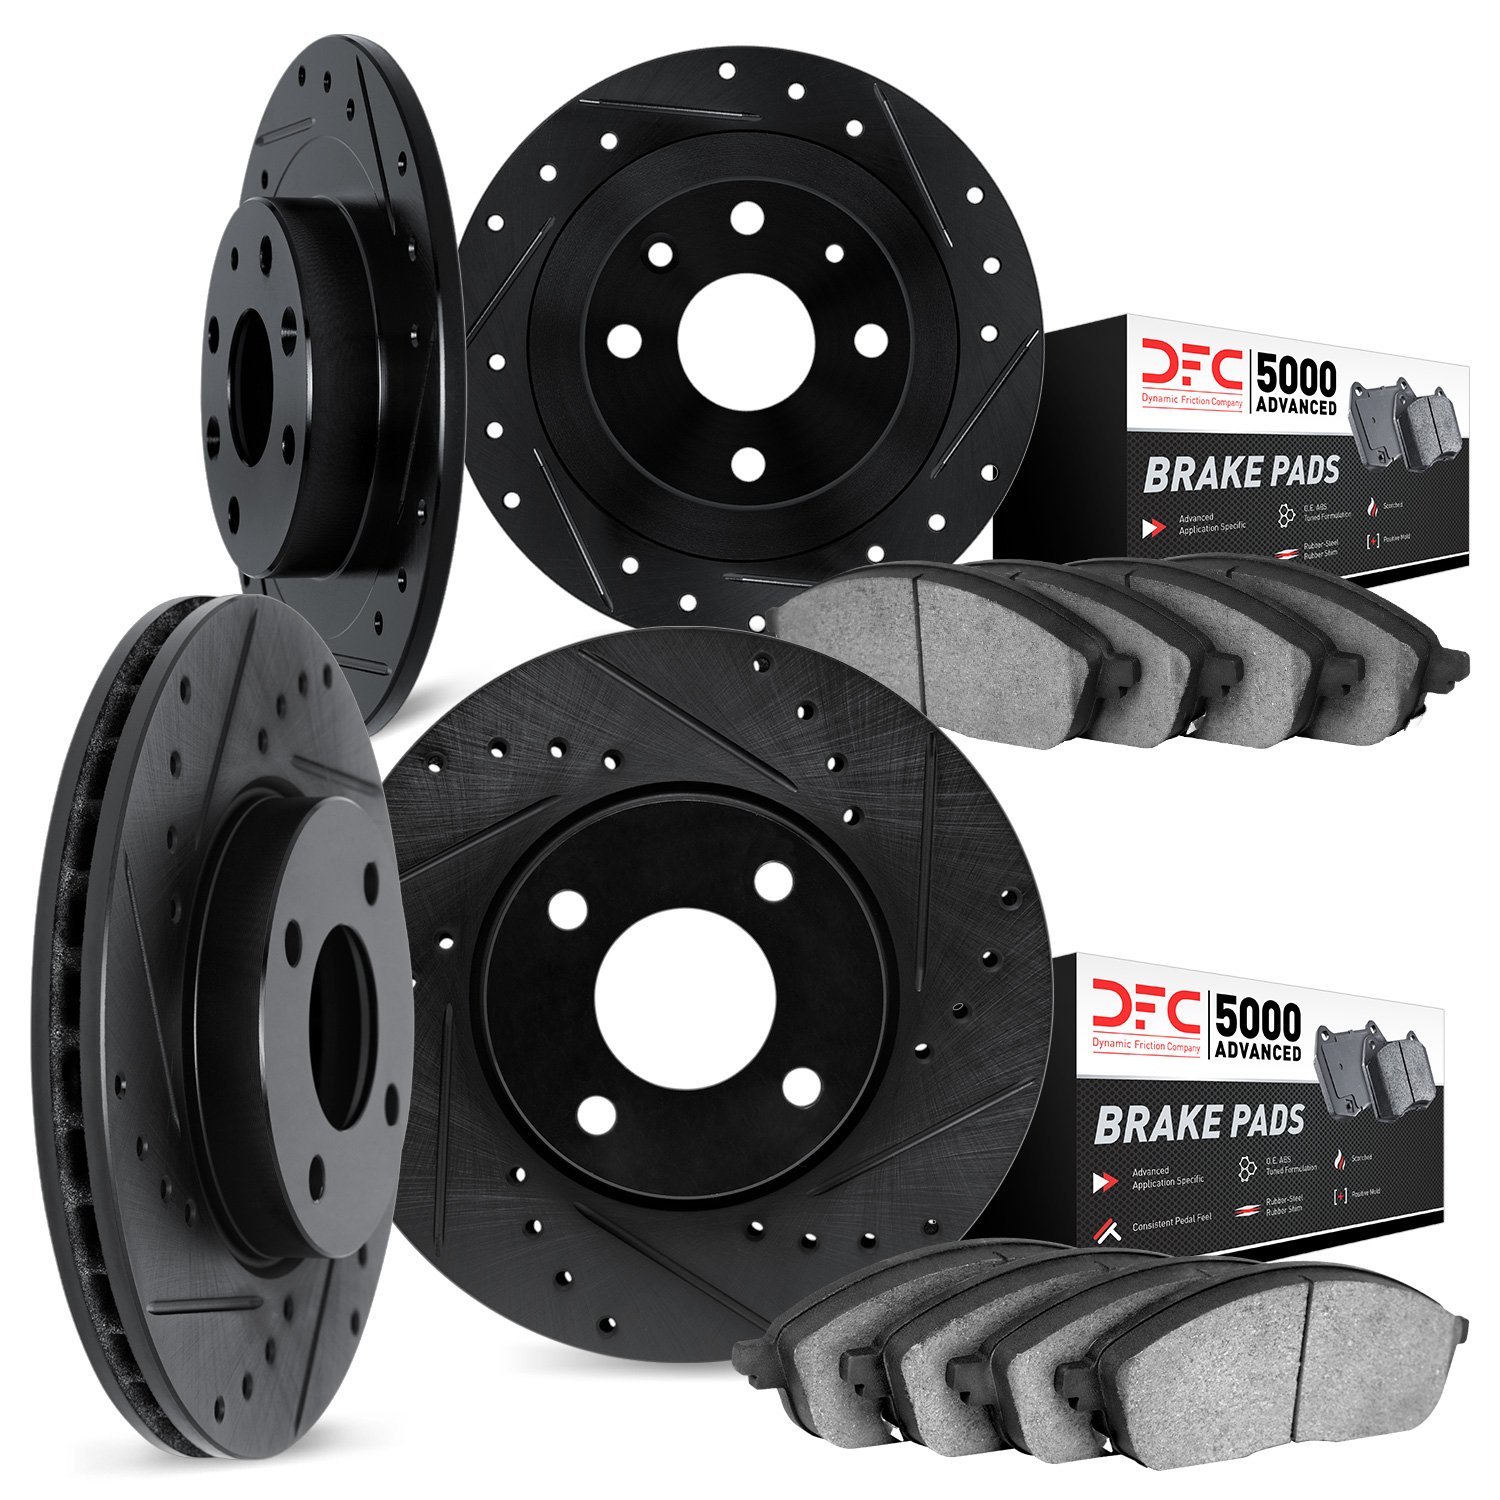 8504-72035 Drilled/Slotted Brake Rotors w/5000 Advanced Brake Pads Kit [Black], 1990-1993 Mitsubishi, Position: Front and Rear